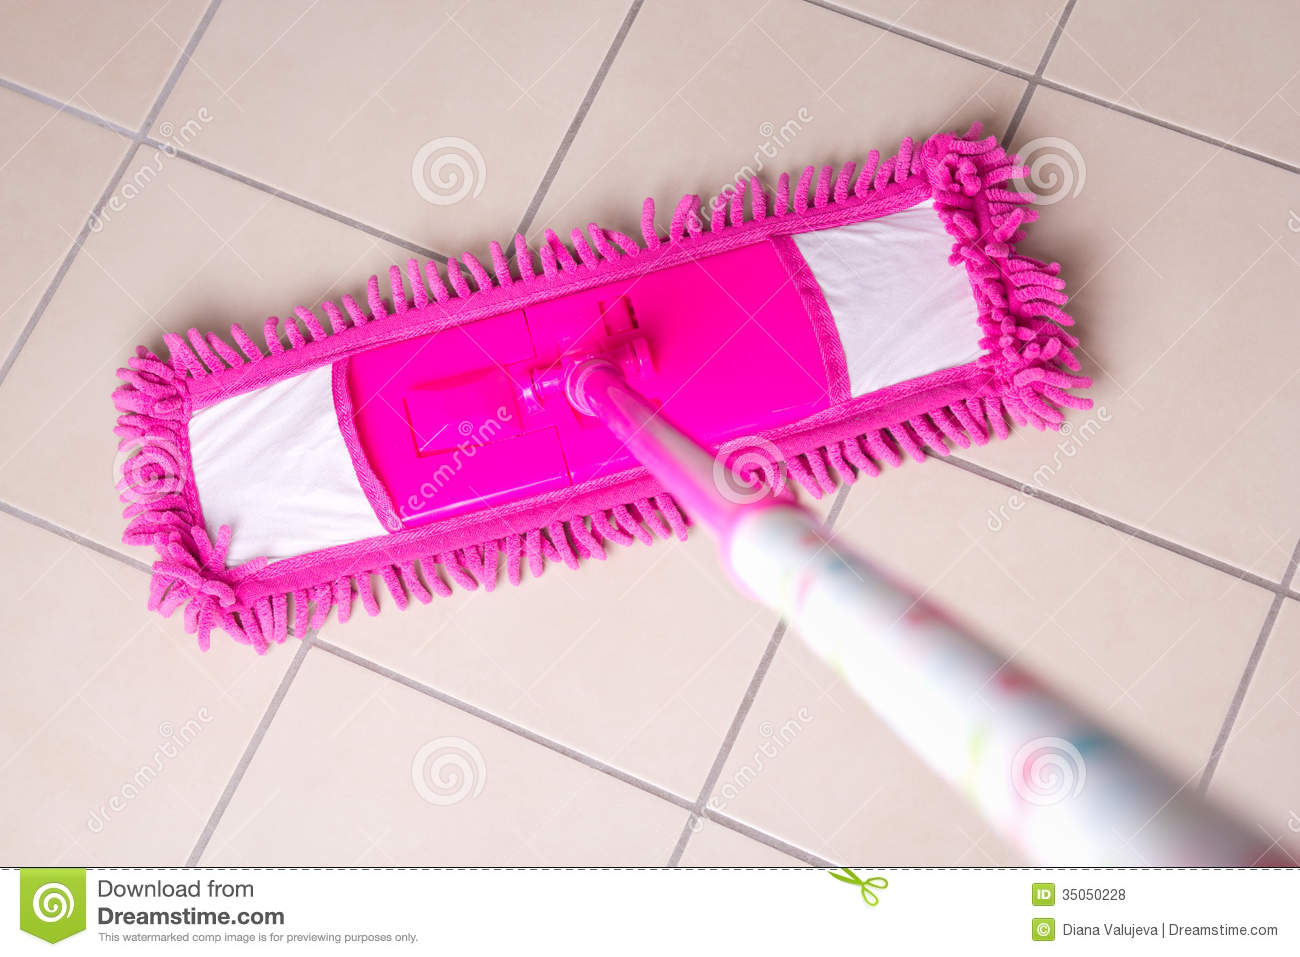 Pink Mop Cleaning Tile Floor In Bathroom Royalty Free Stock Photos